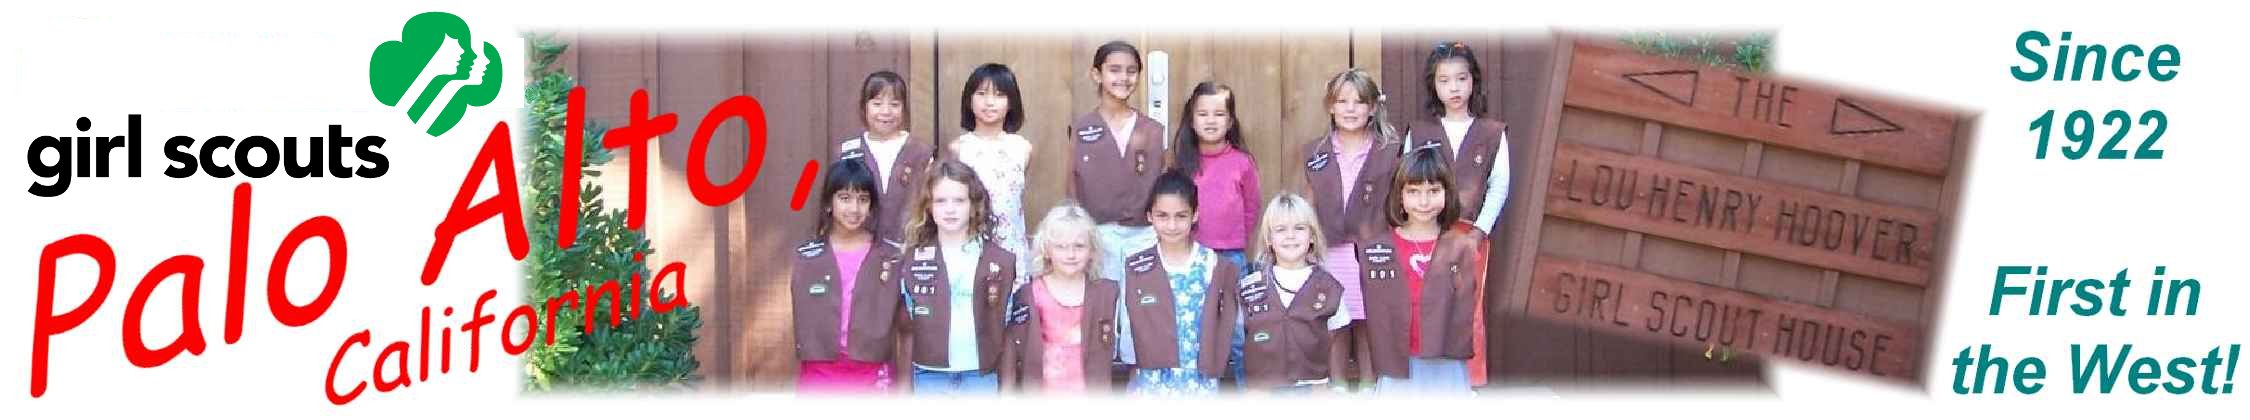 Girl Scouts of Palo Alto Home Page